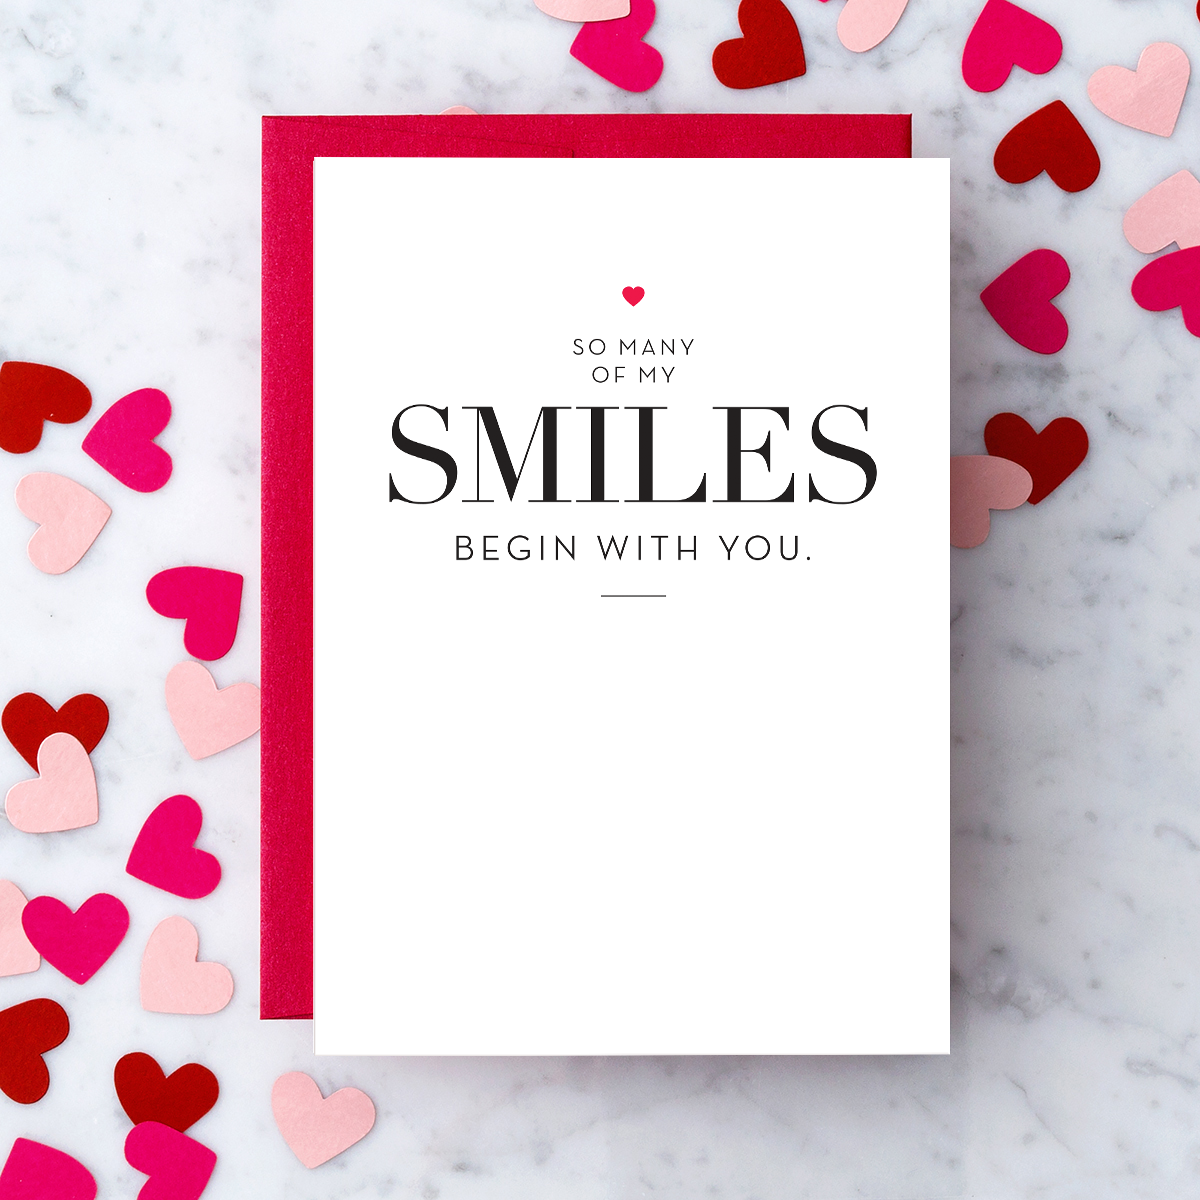 "So many of my smiles begin with you." Greeting Card